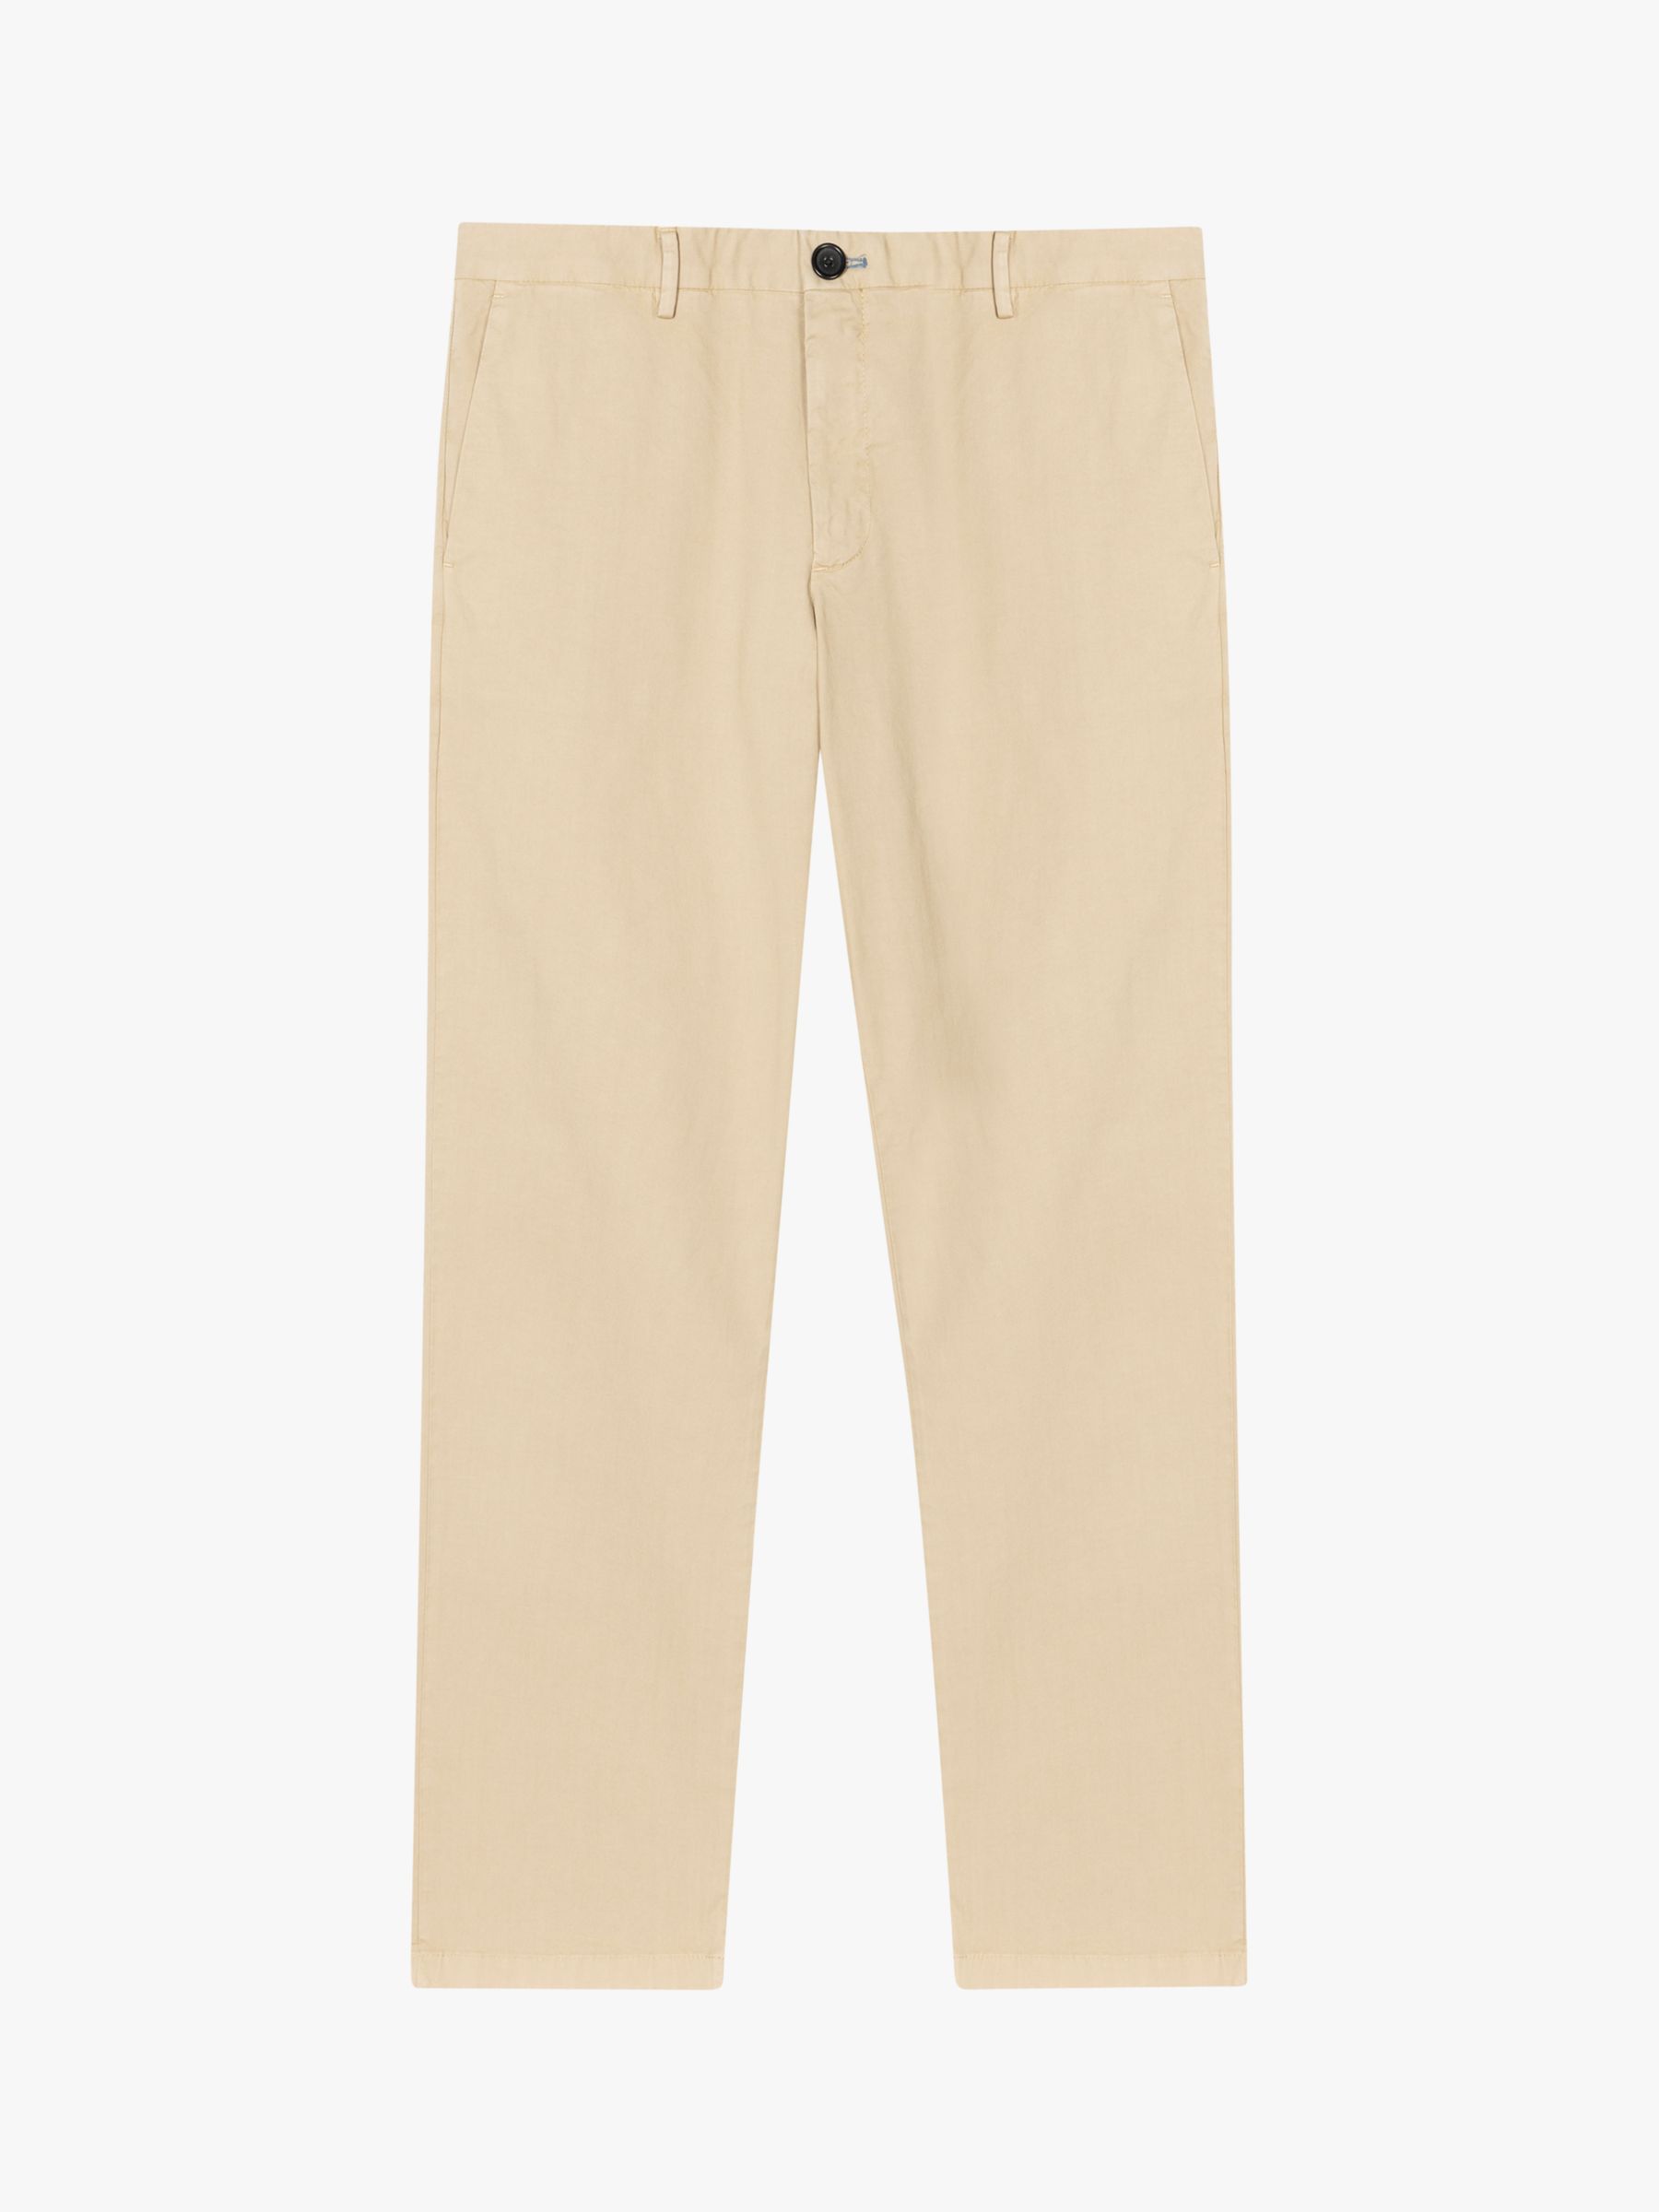 Buy Paul Smith Organic Cotton Stretch Chinos, Beige Online at johnlewis.com